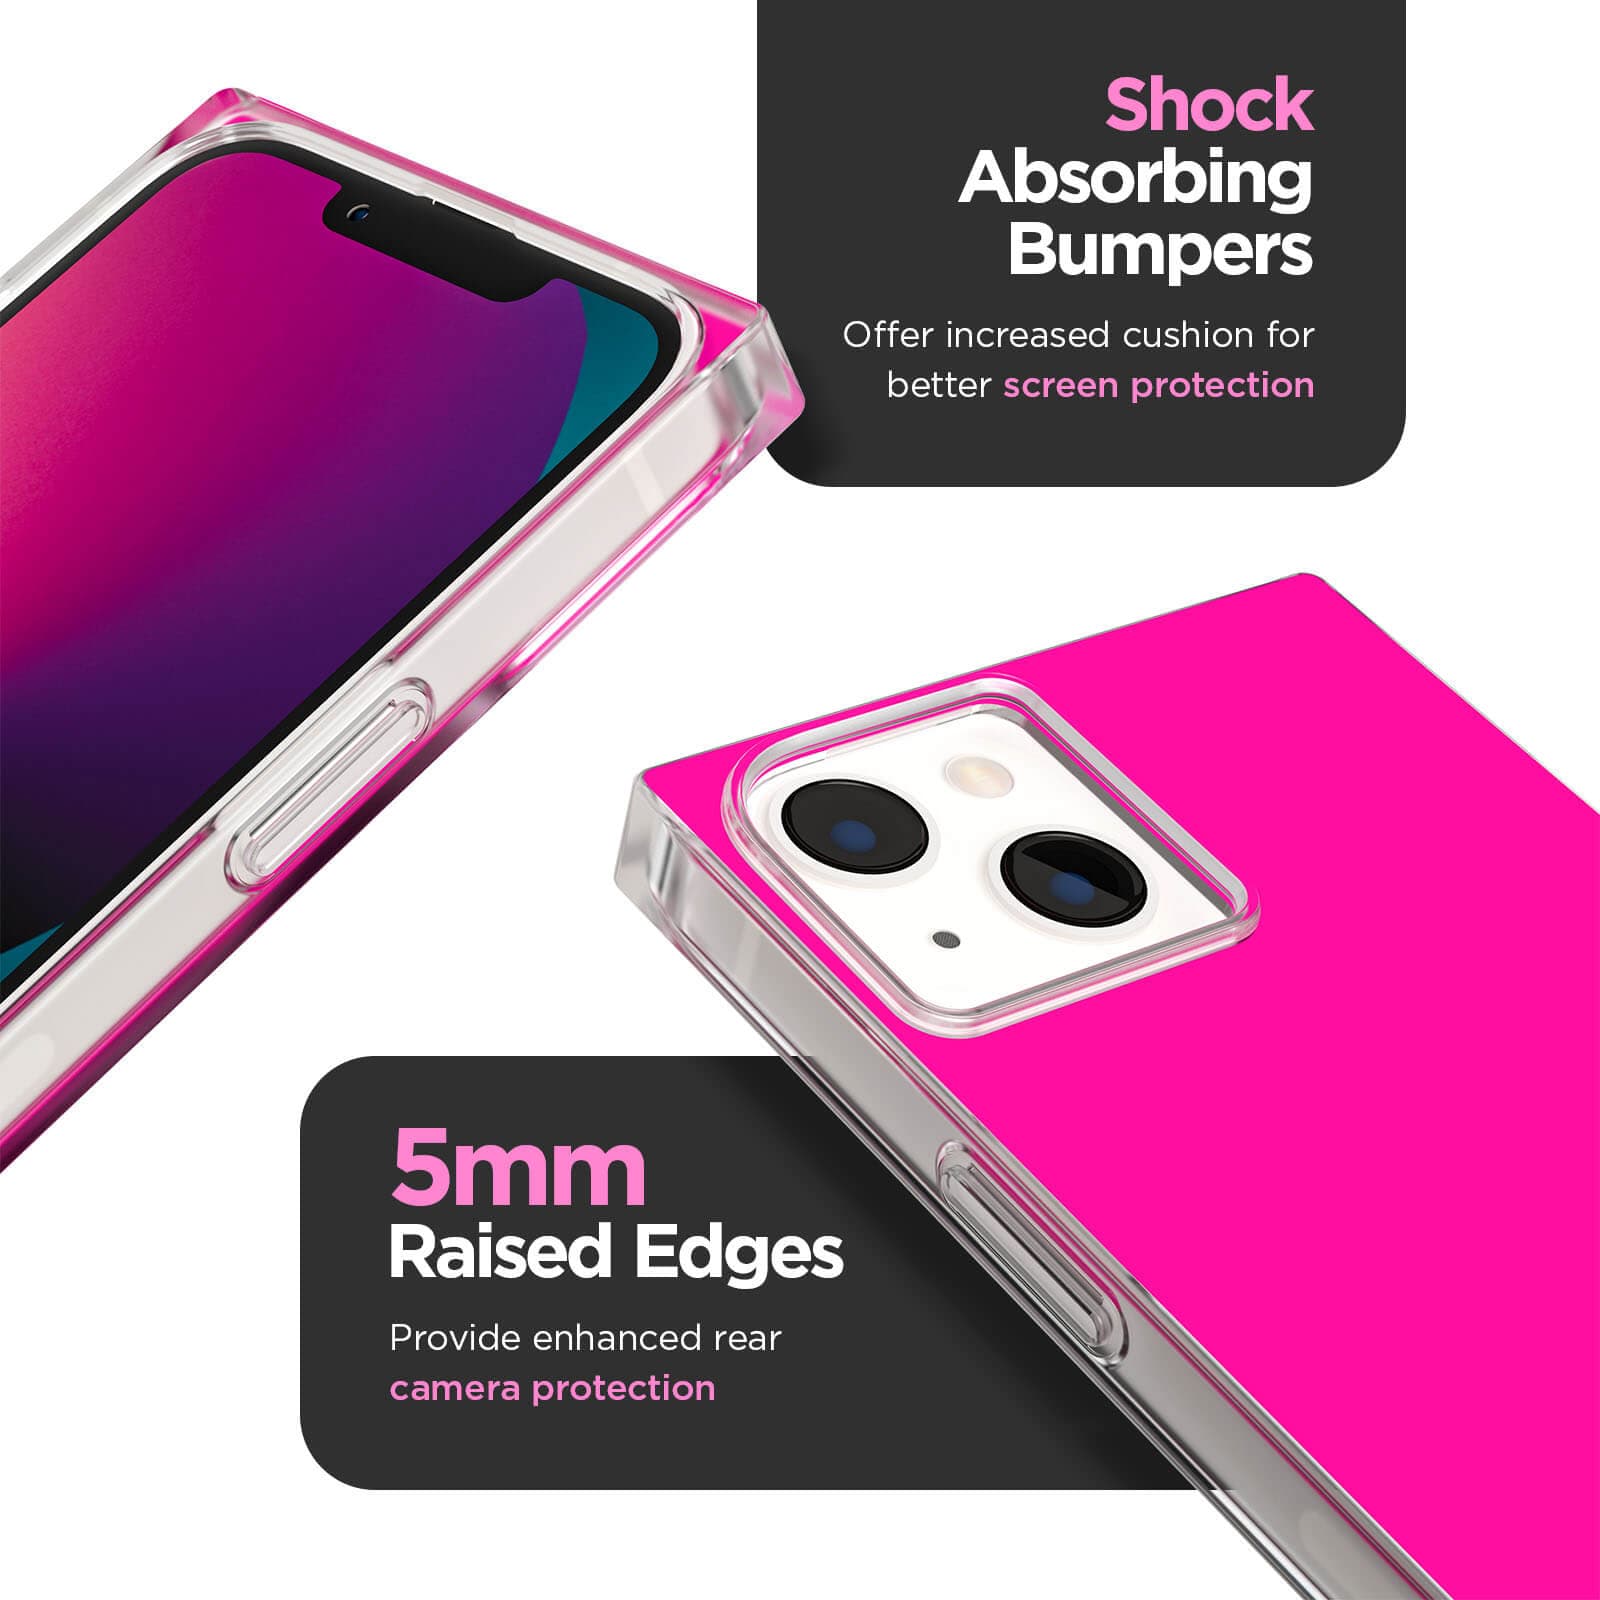 Shock absorbing bumper offer increased cushion for better screen protection. 5mm raised edges provide enhanced rear camera protection. scolor::Hot Pink